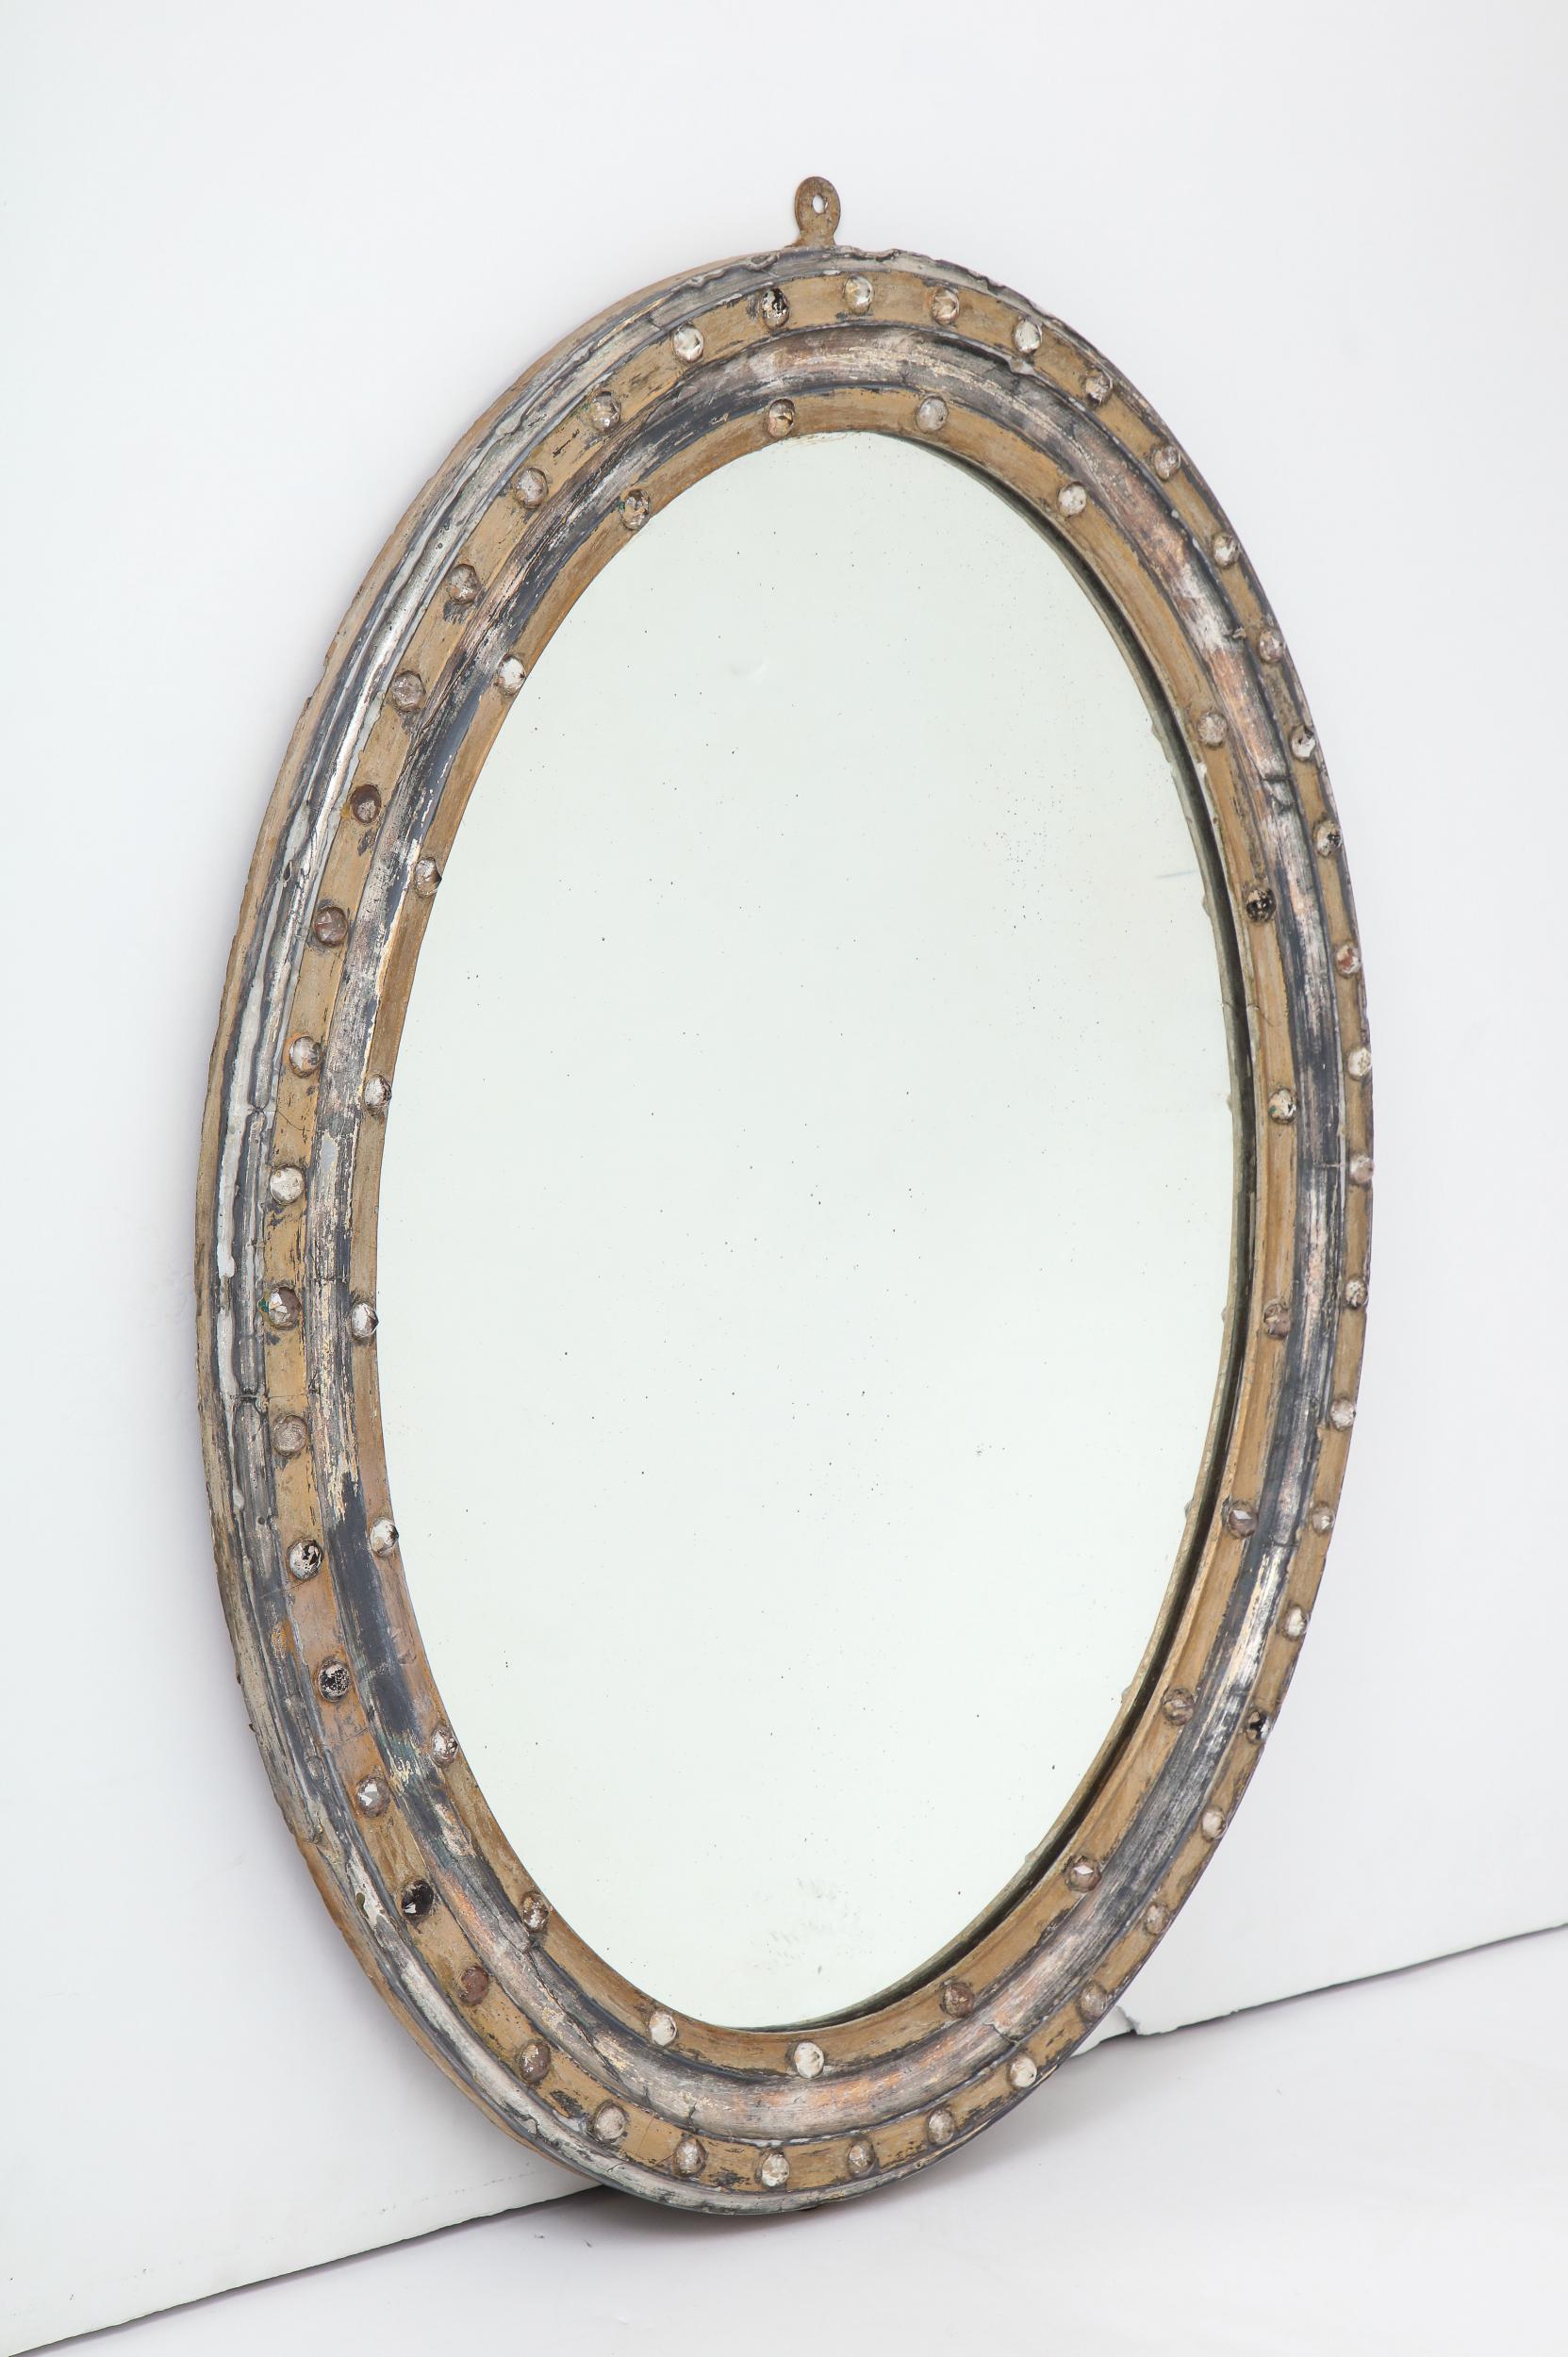 Antique Georgian style round wall mirror with silver gilt frame made in Ireland circa early 1800s. Mirror features a circular, double border frame encrusted with rock crystals. These nice details are accentuated by the patina on the frame. Original